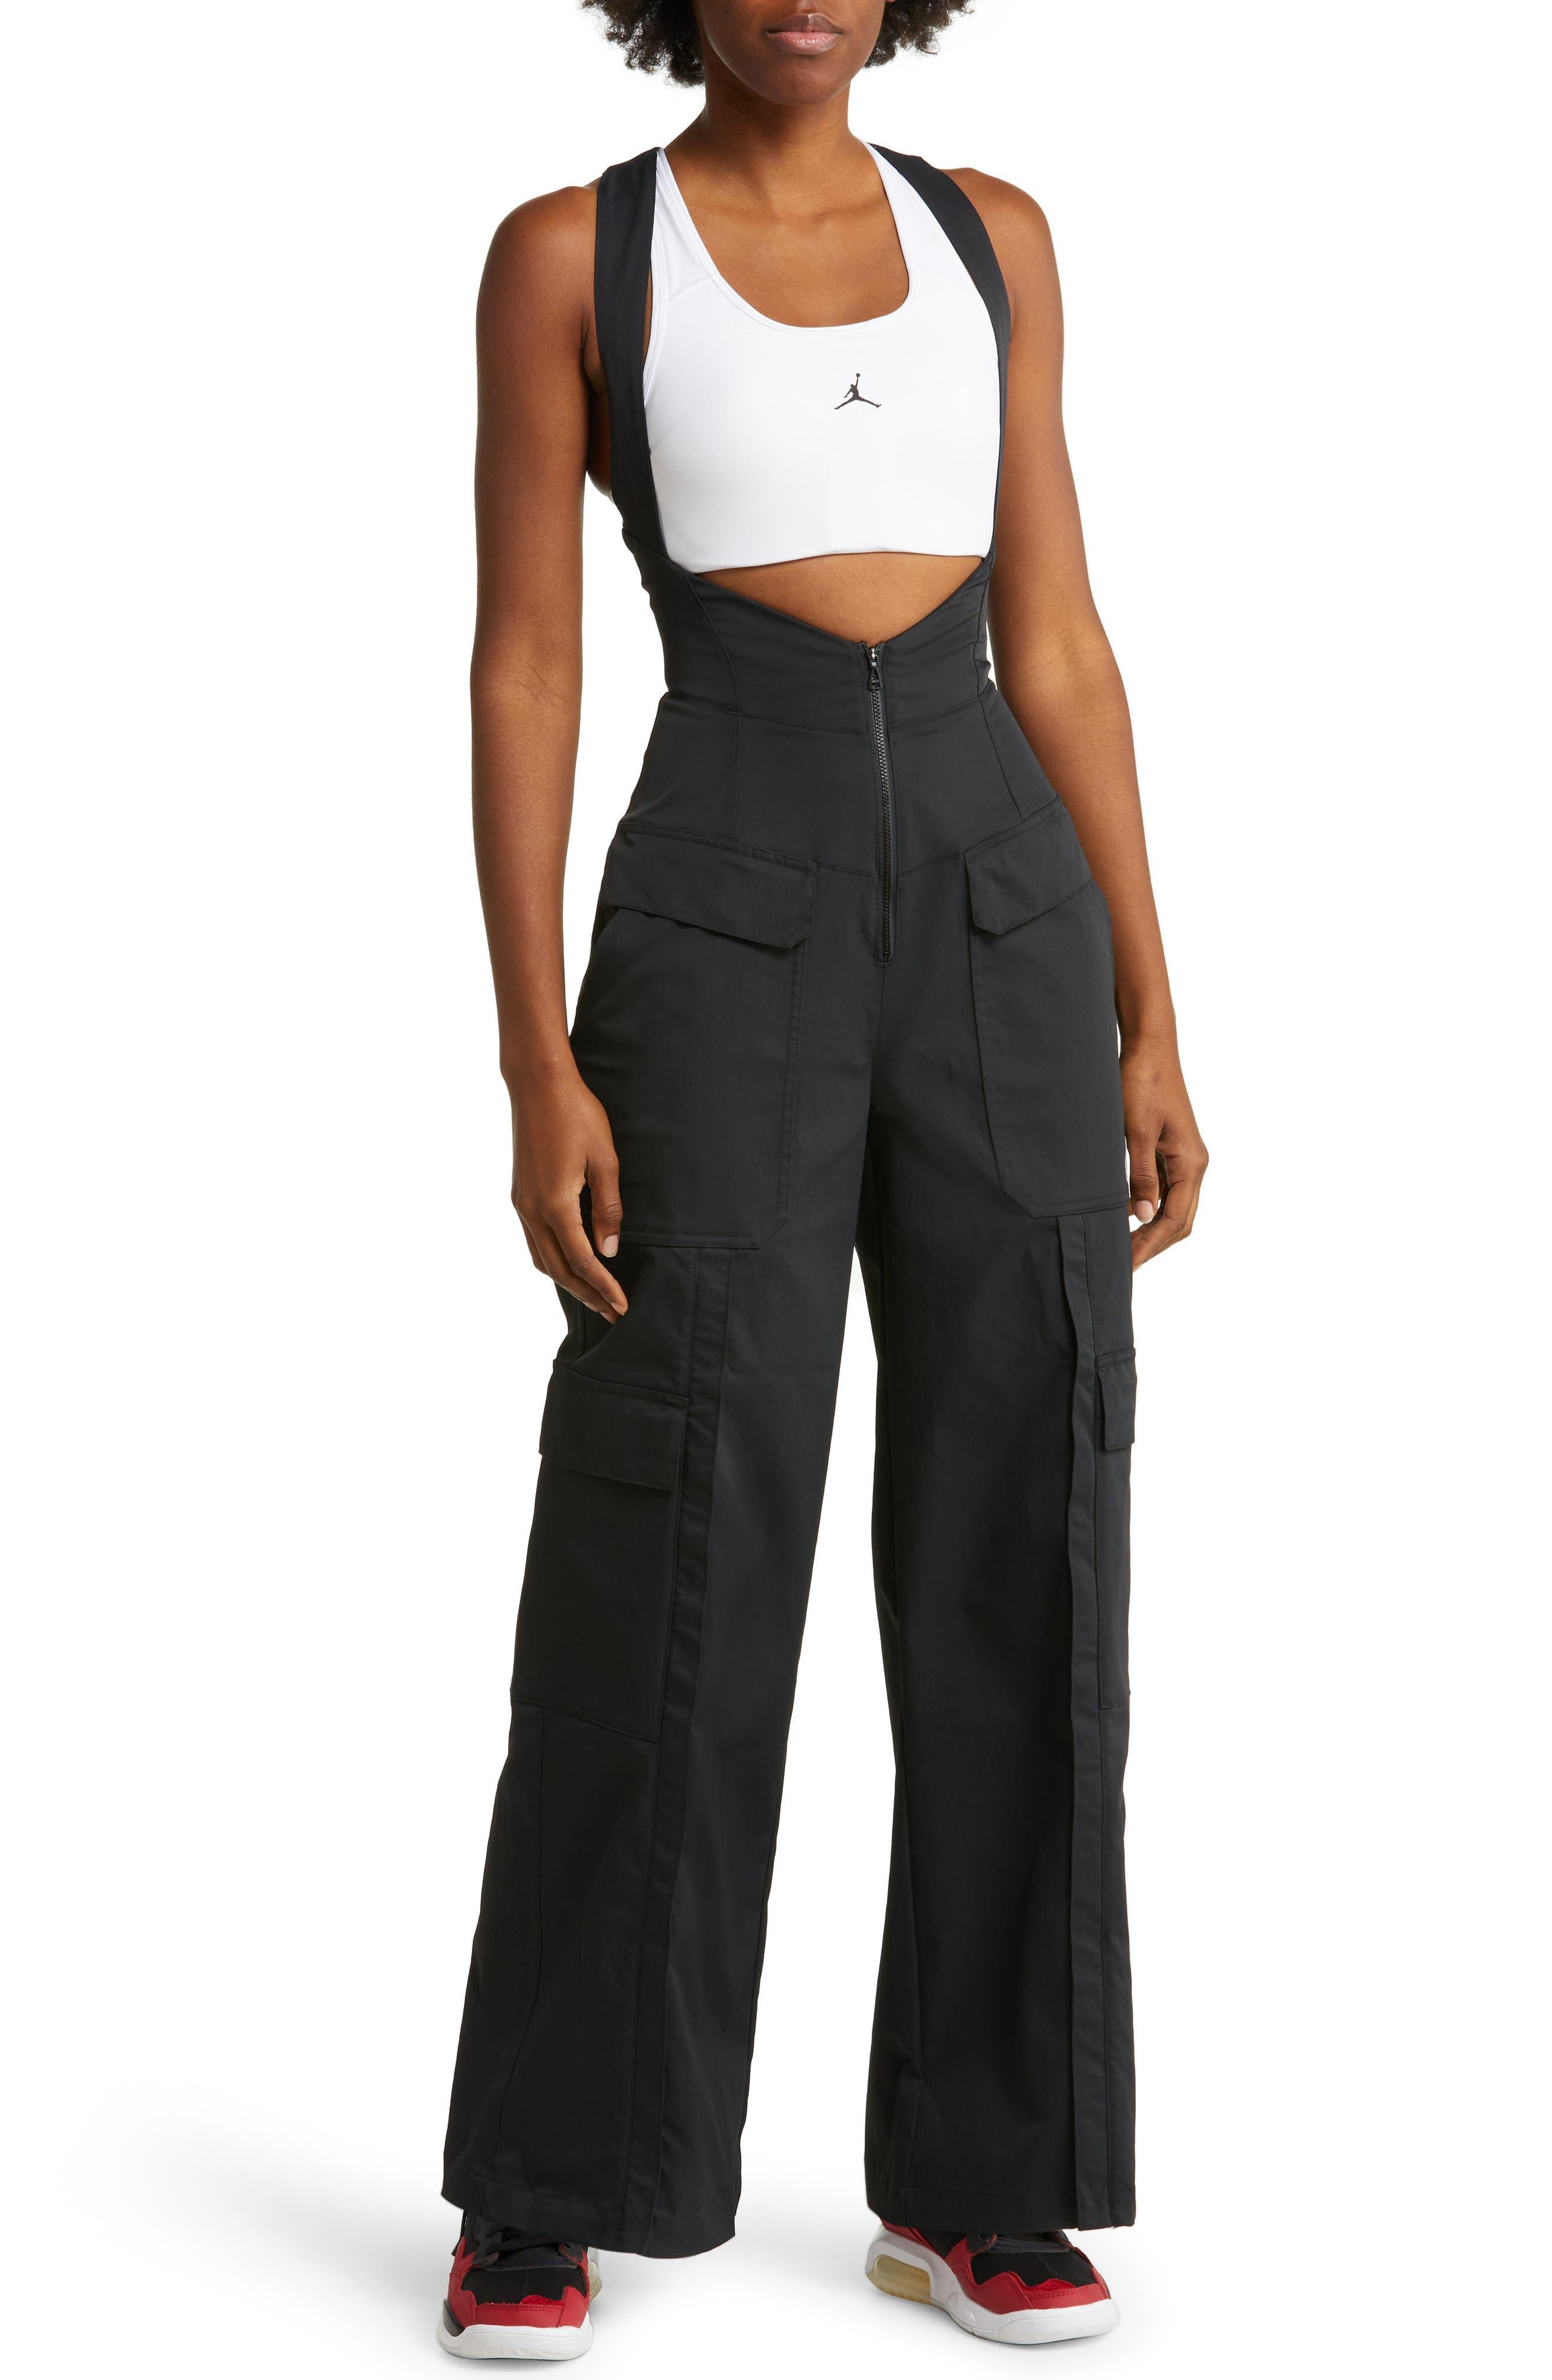 Nike 23 Engineered Chicago Corset Cutout Overalls in Black